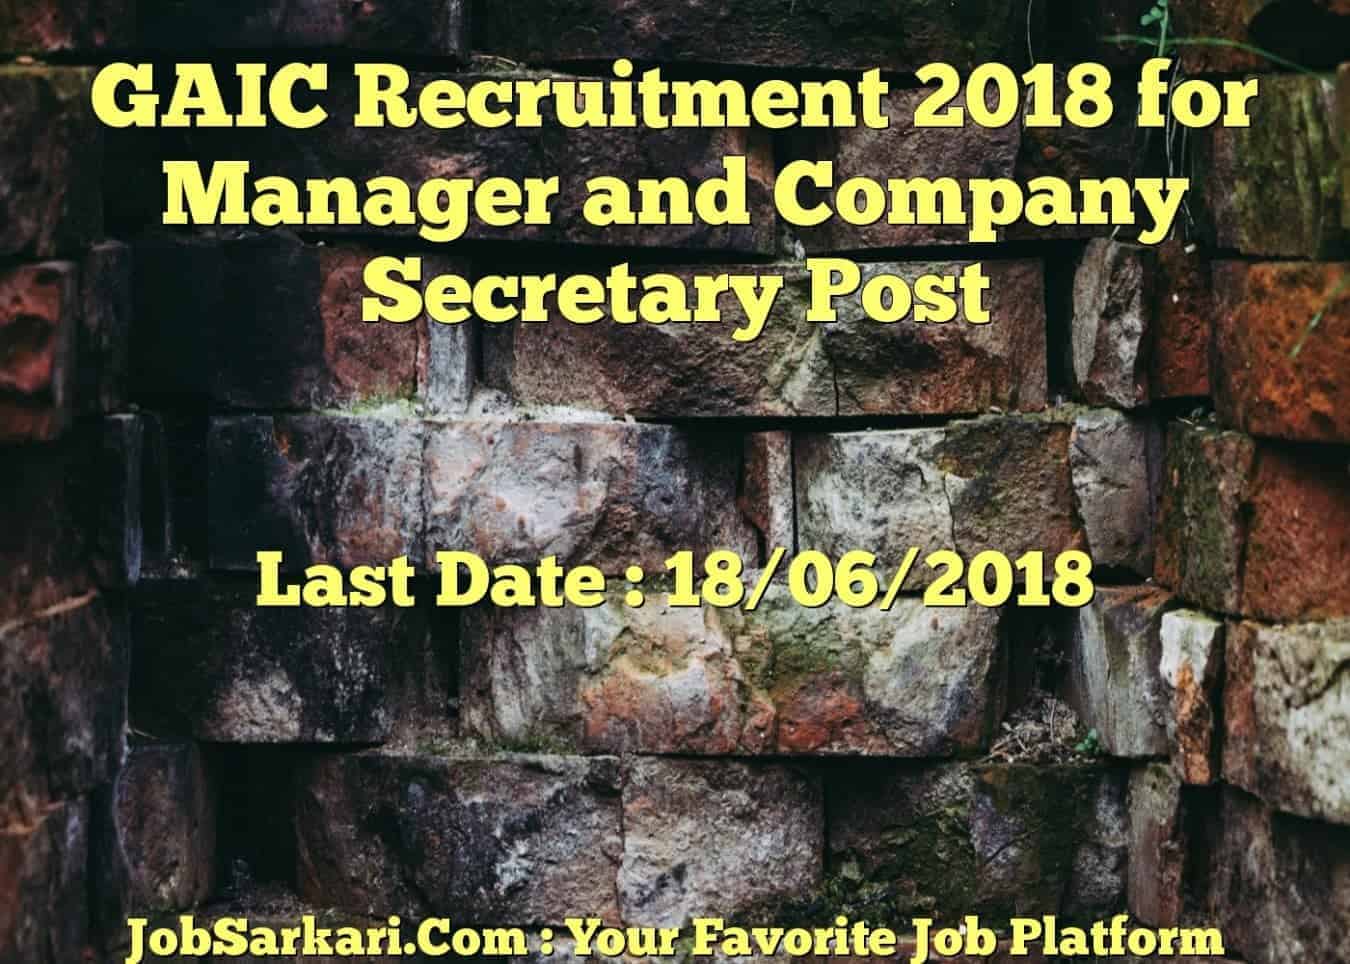 GAIC Recruitment 2018 for Manager and Company Secretary Post